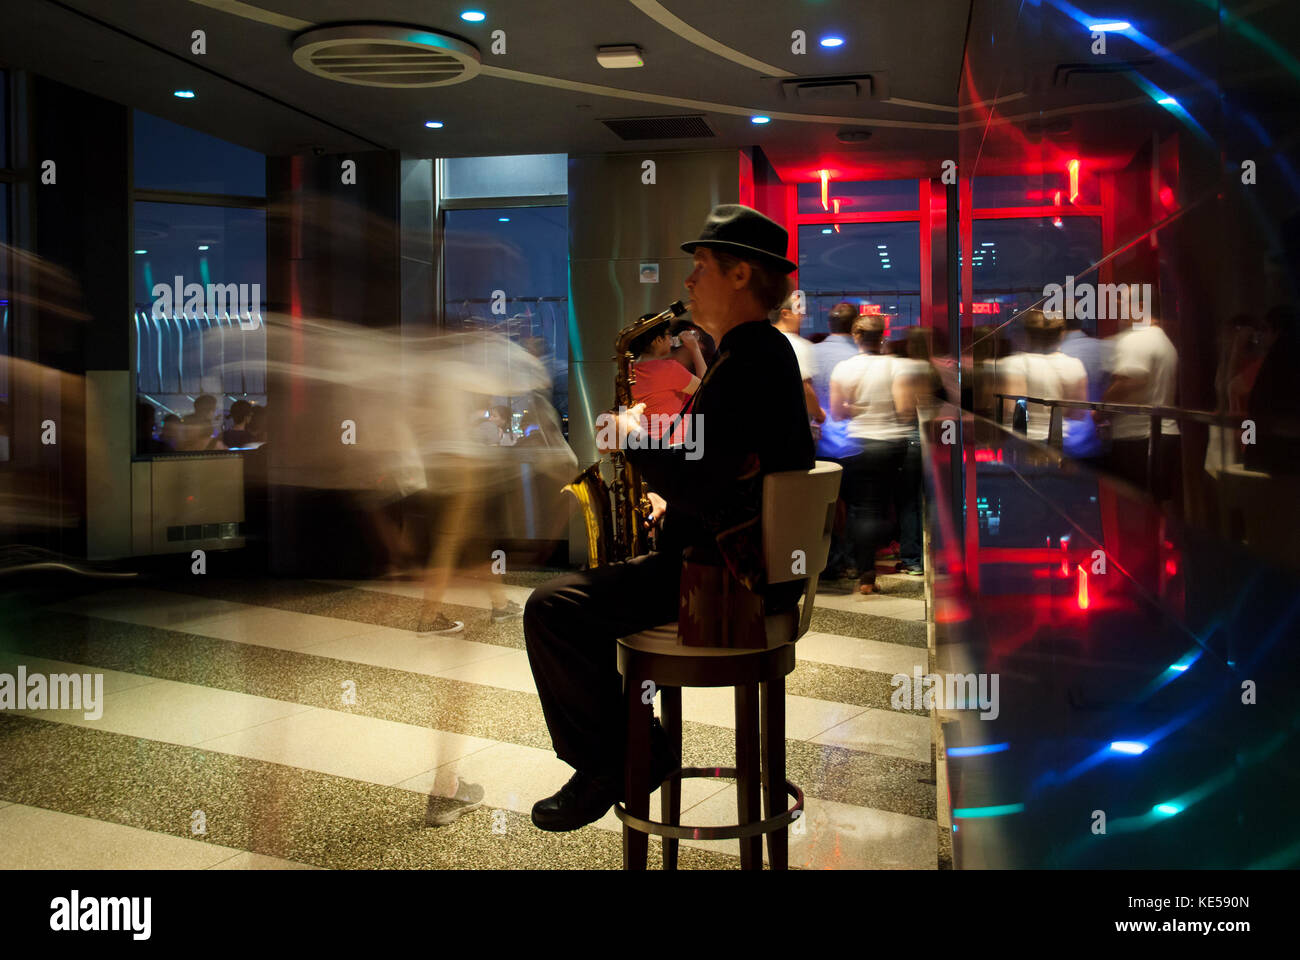 New York City, Usa - July 11, 2015: Wil Greenstreet performing with saxophone. His current gig is entertaining visitors to the 86th floor of the Empir Stock Photo